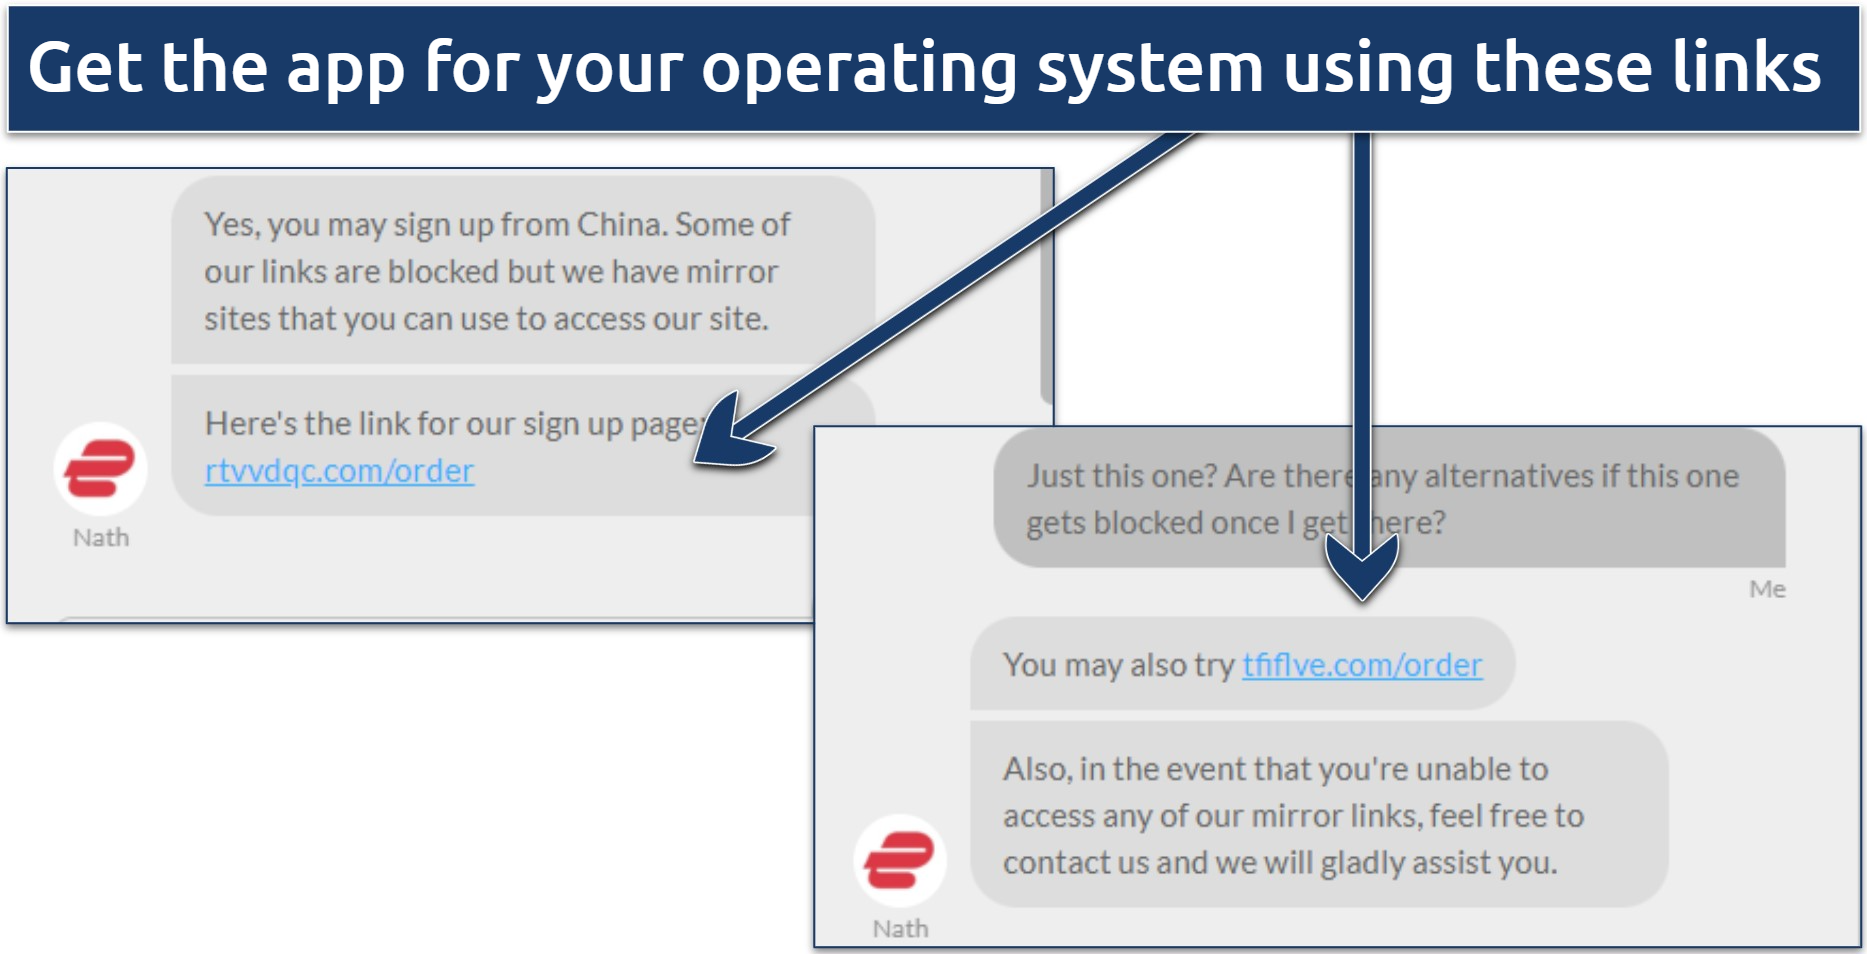 Screenshot showing a conversation with ExpressVPN live char support regarding its mirror URLs for China